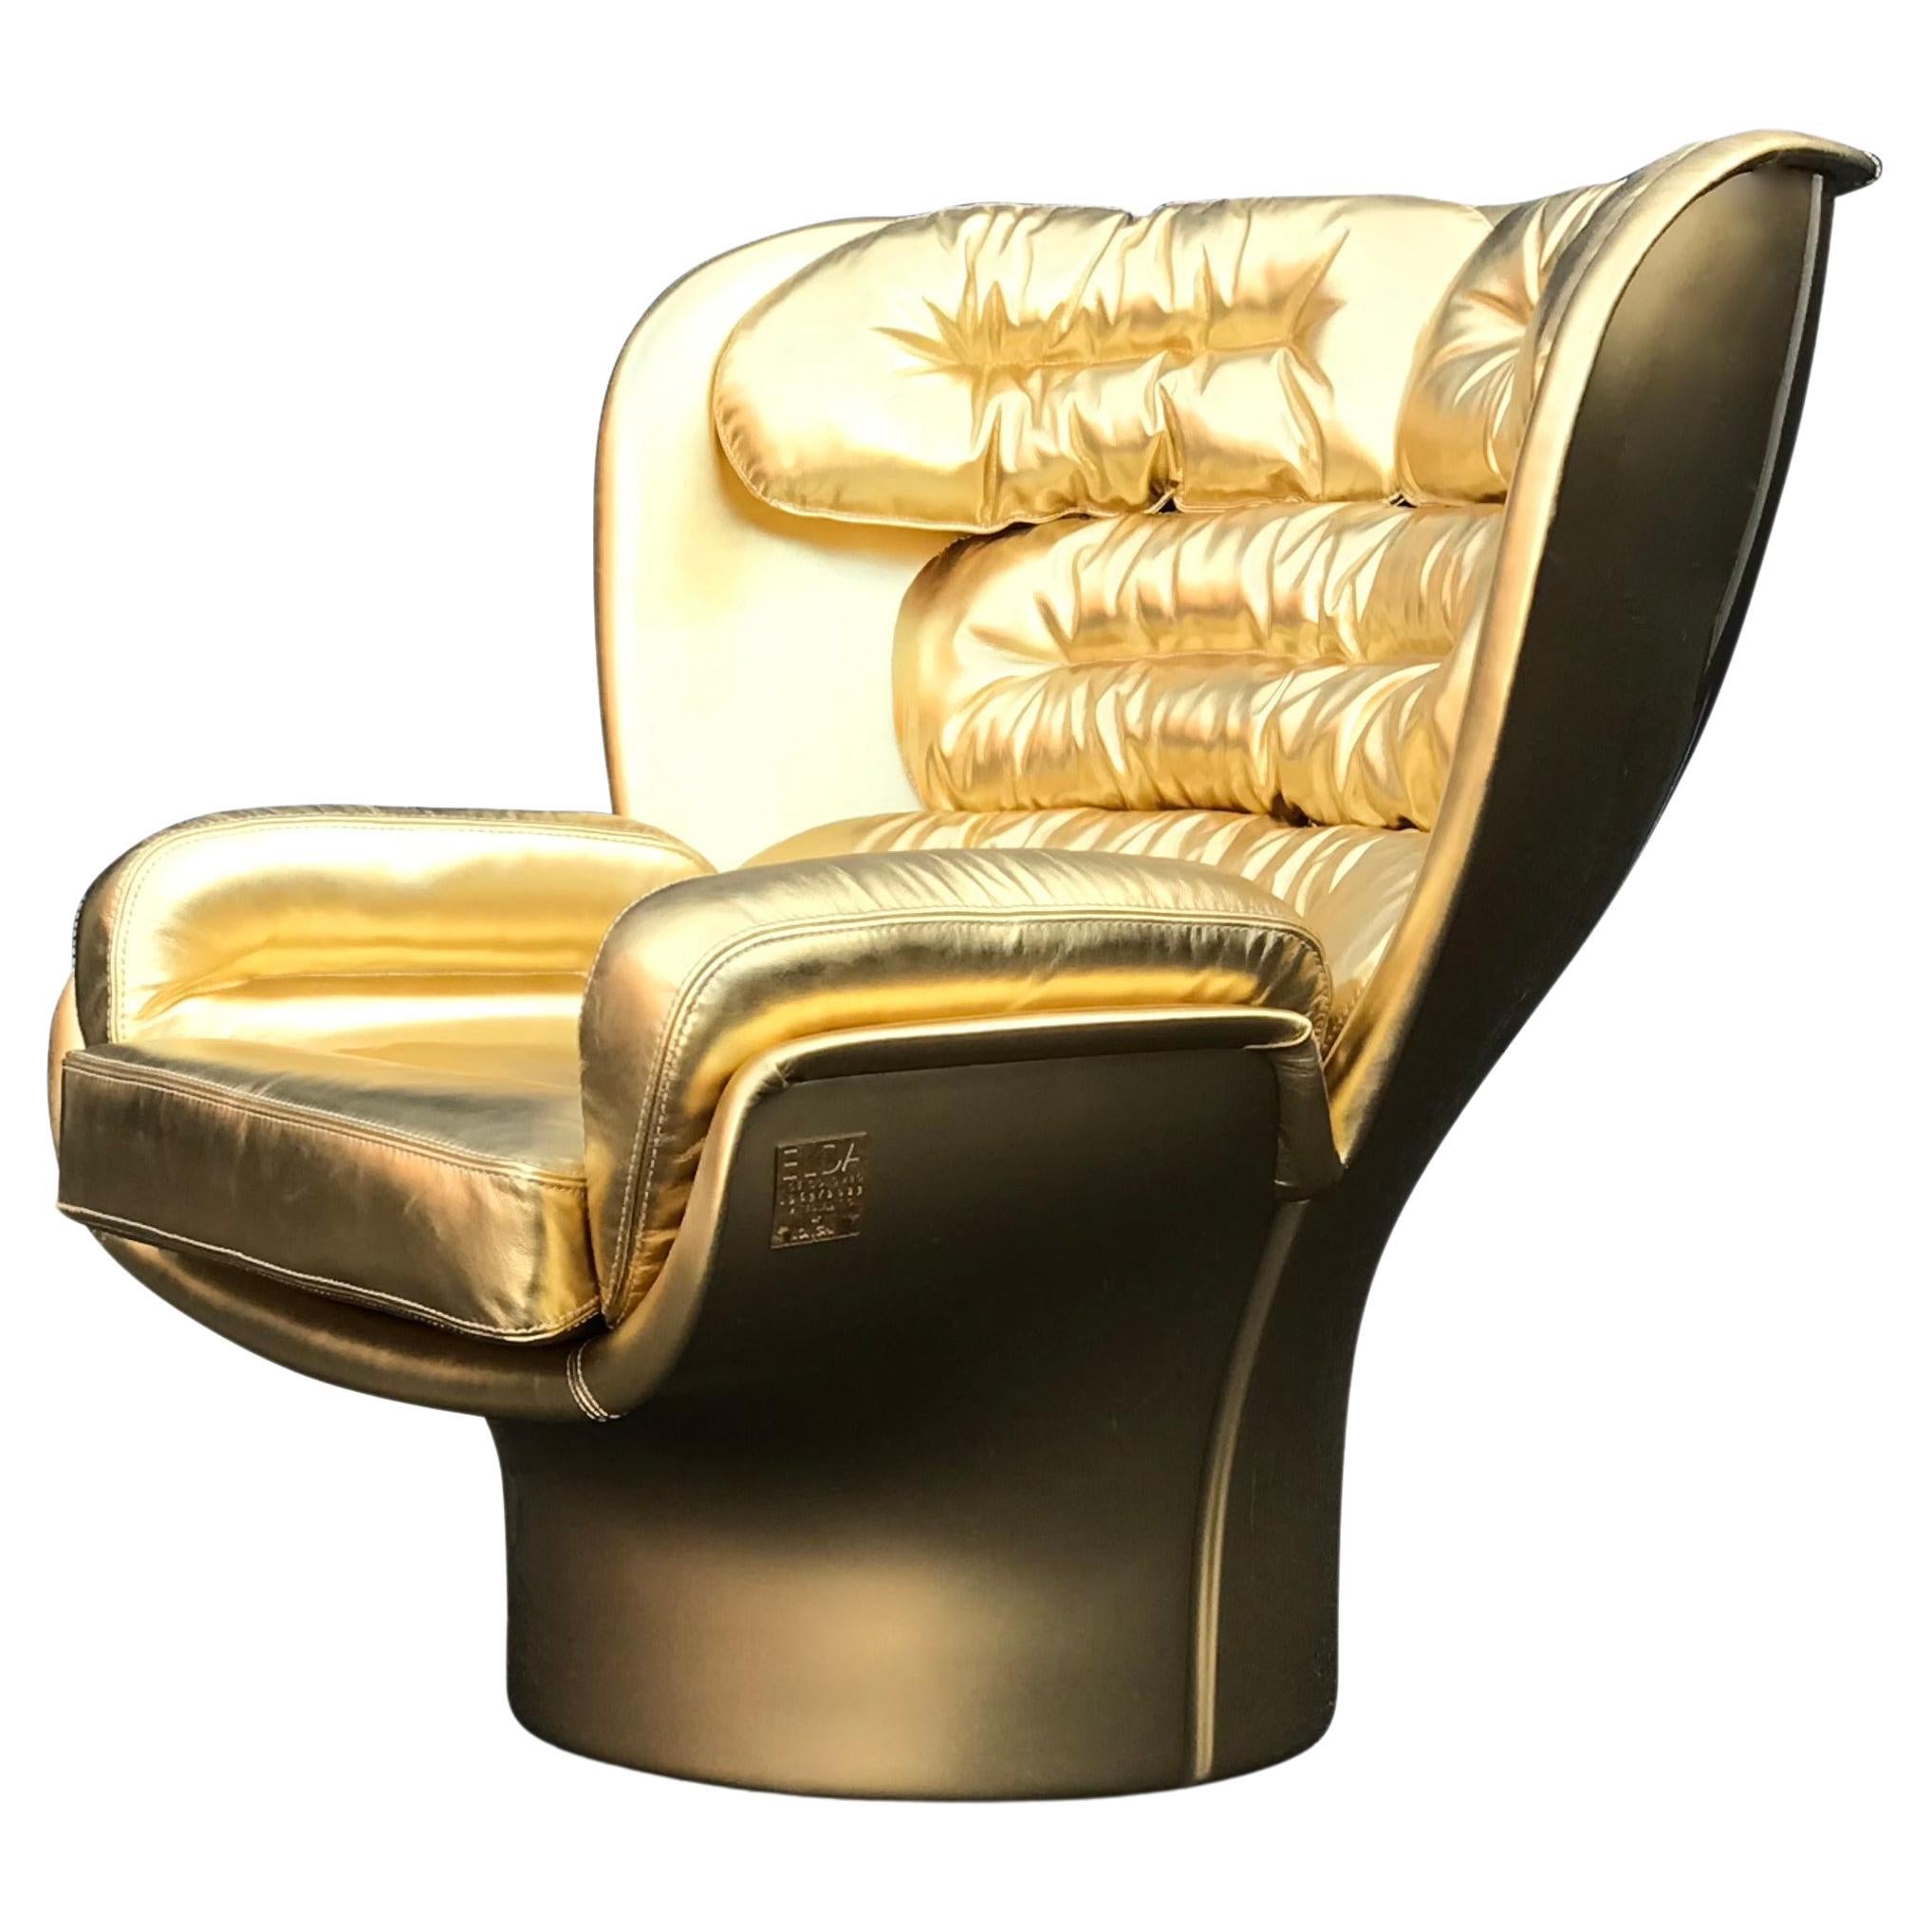 Golden Limited Edition Elda Chair by Joe Colombo for Longhi Italy no. 7/20 For Sale